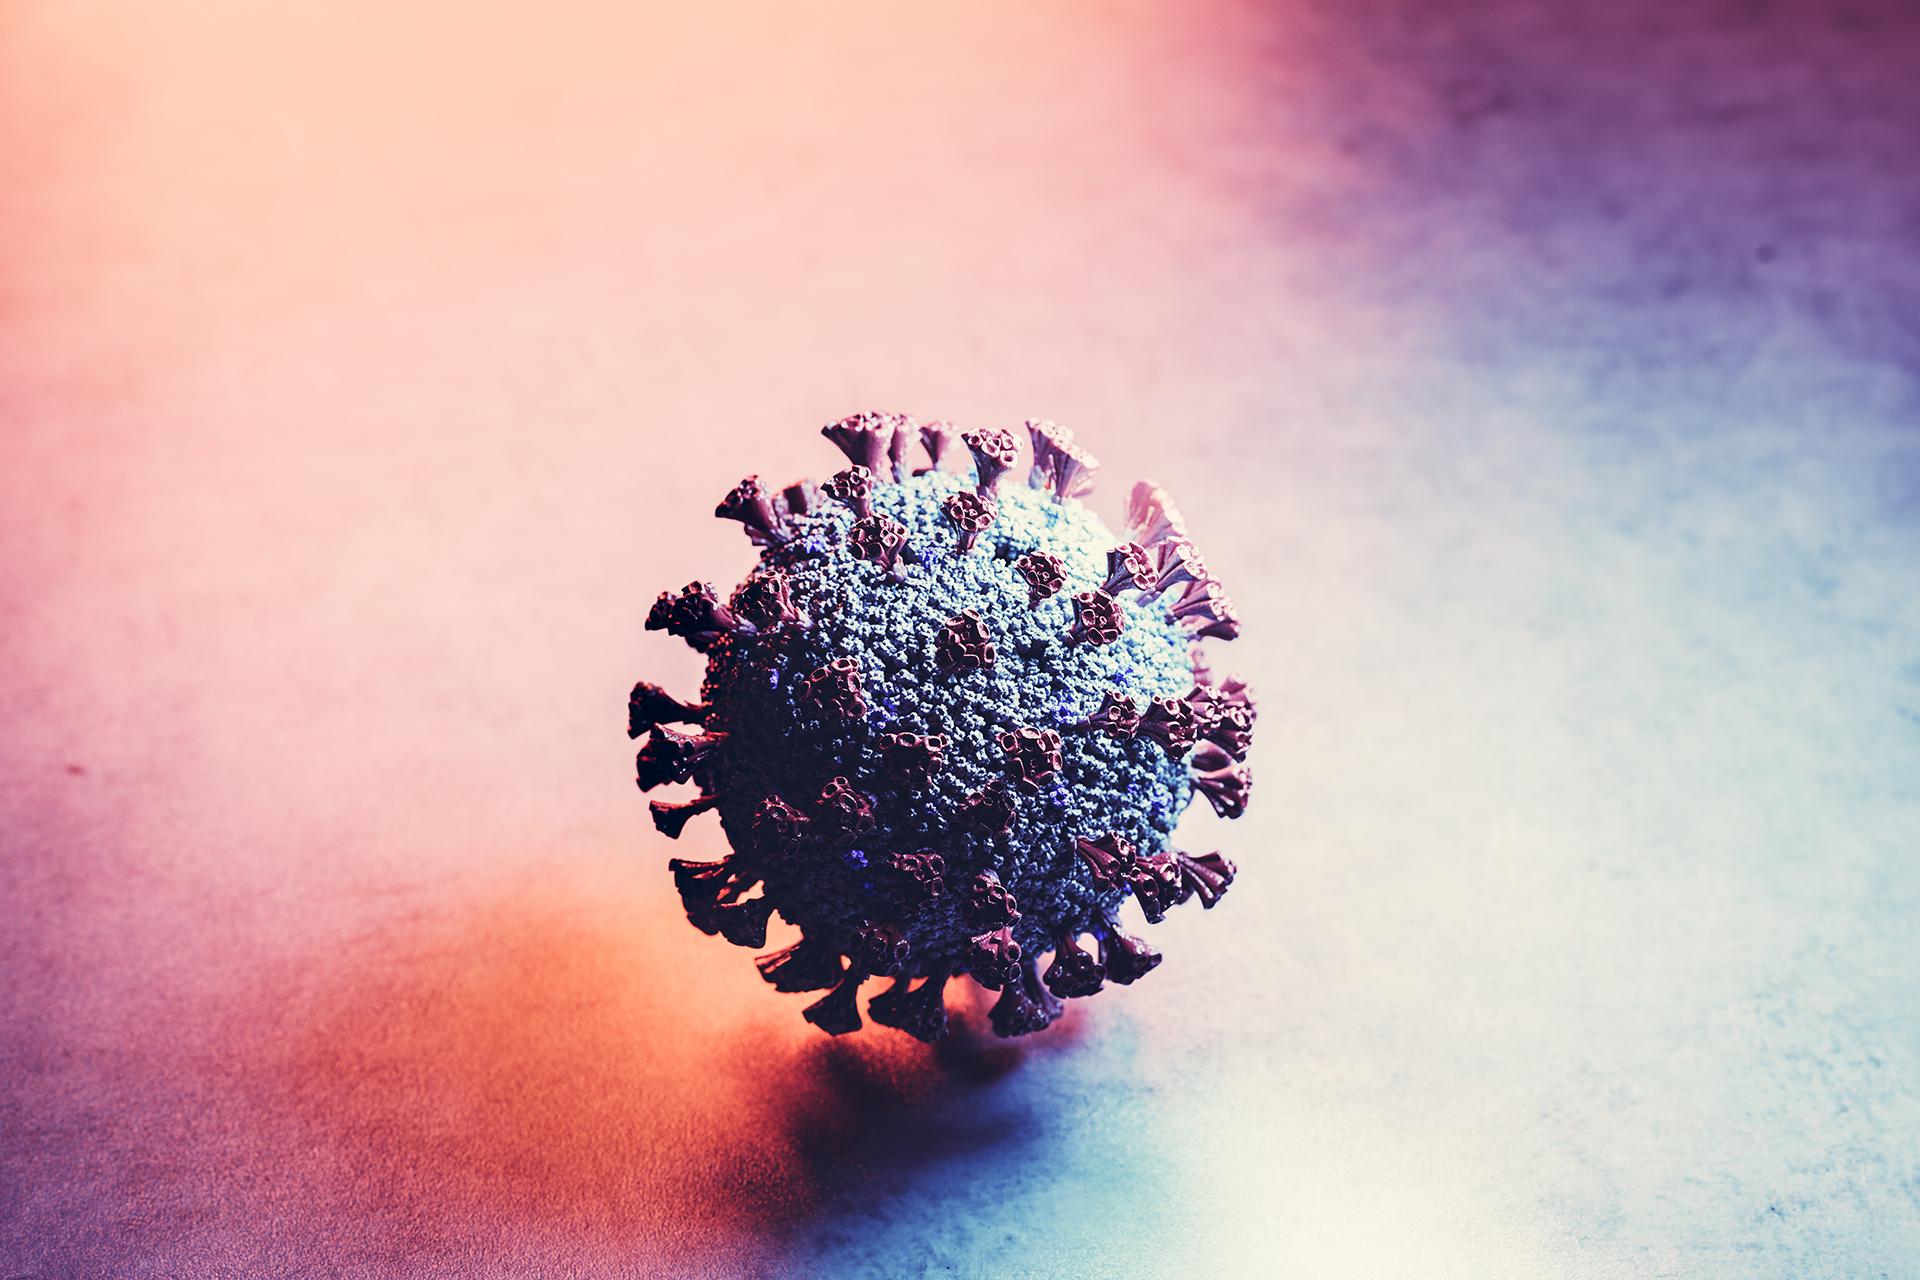 Omicron Virus: All That You Need to Know About this New COVID-19 Variant